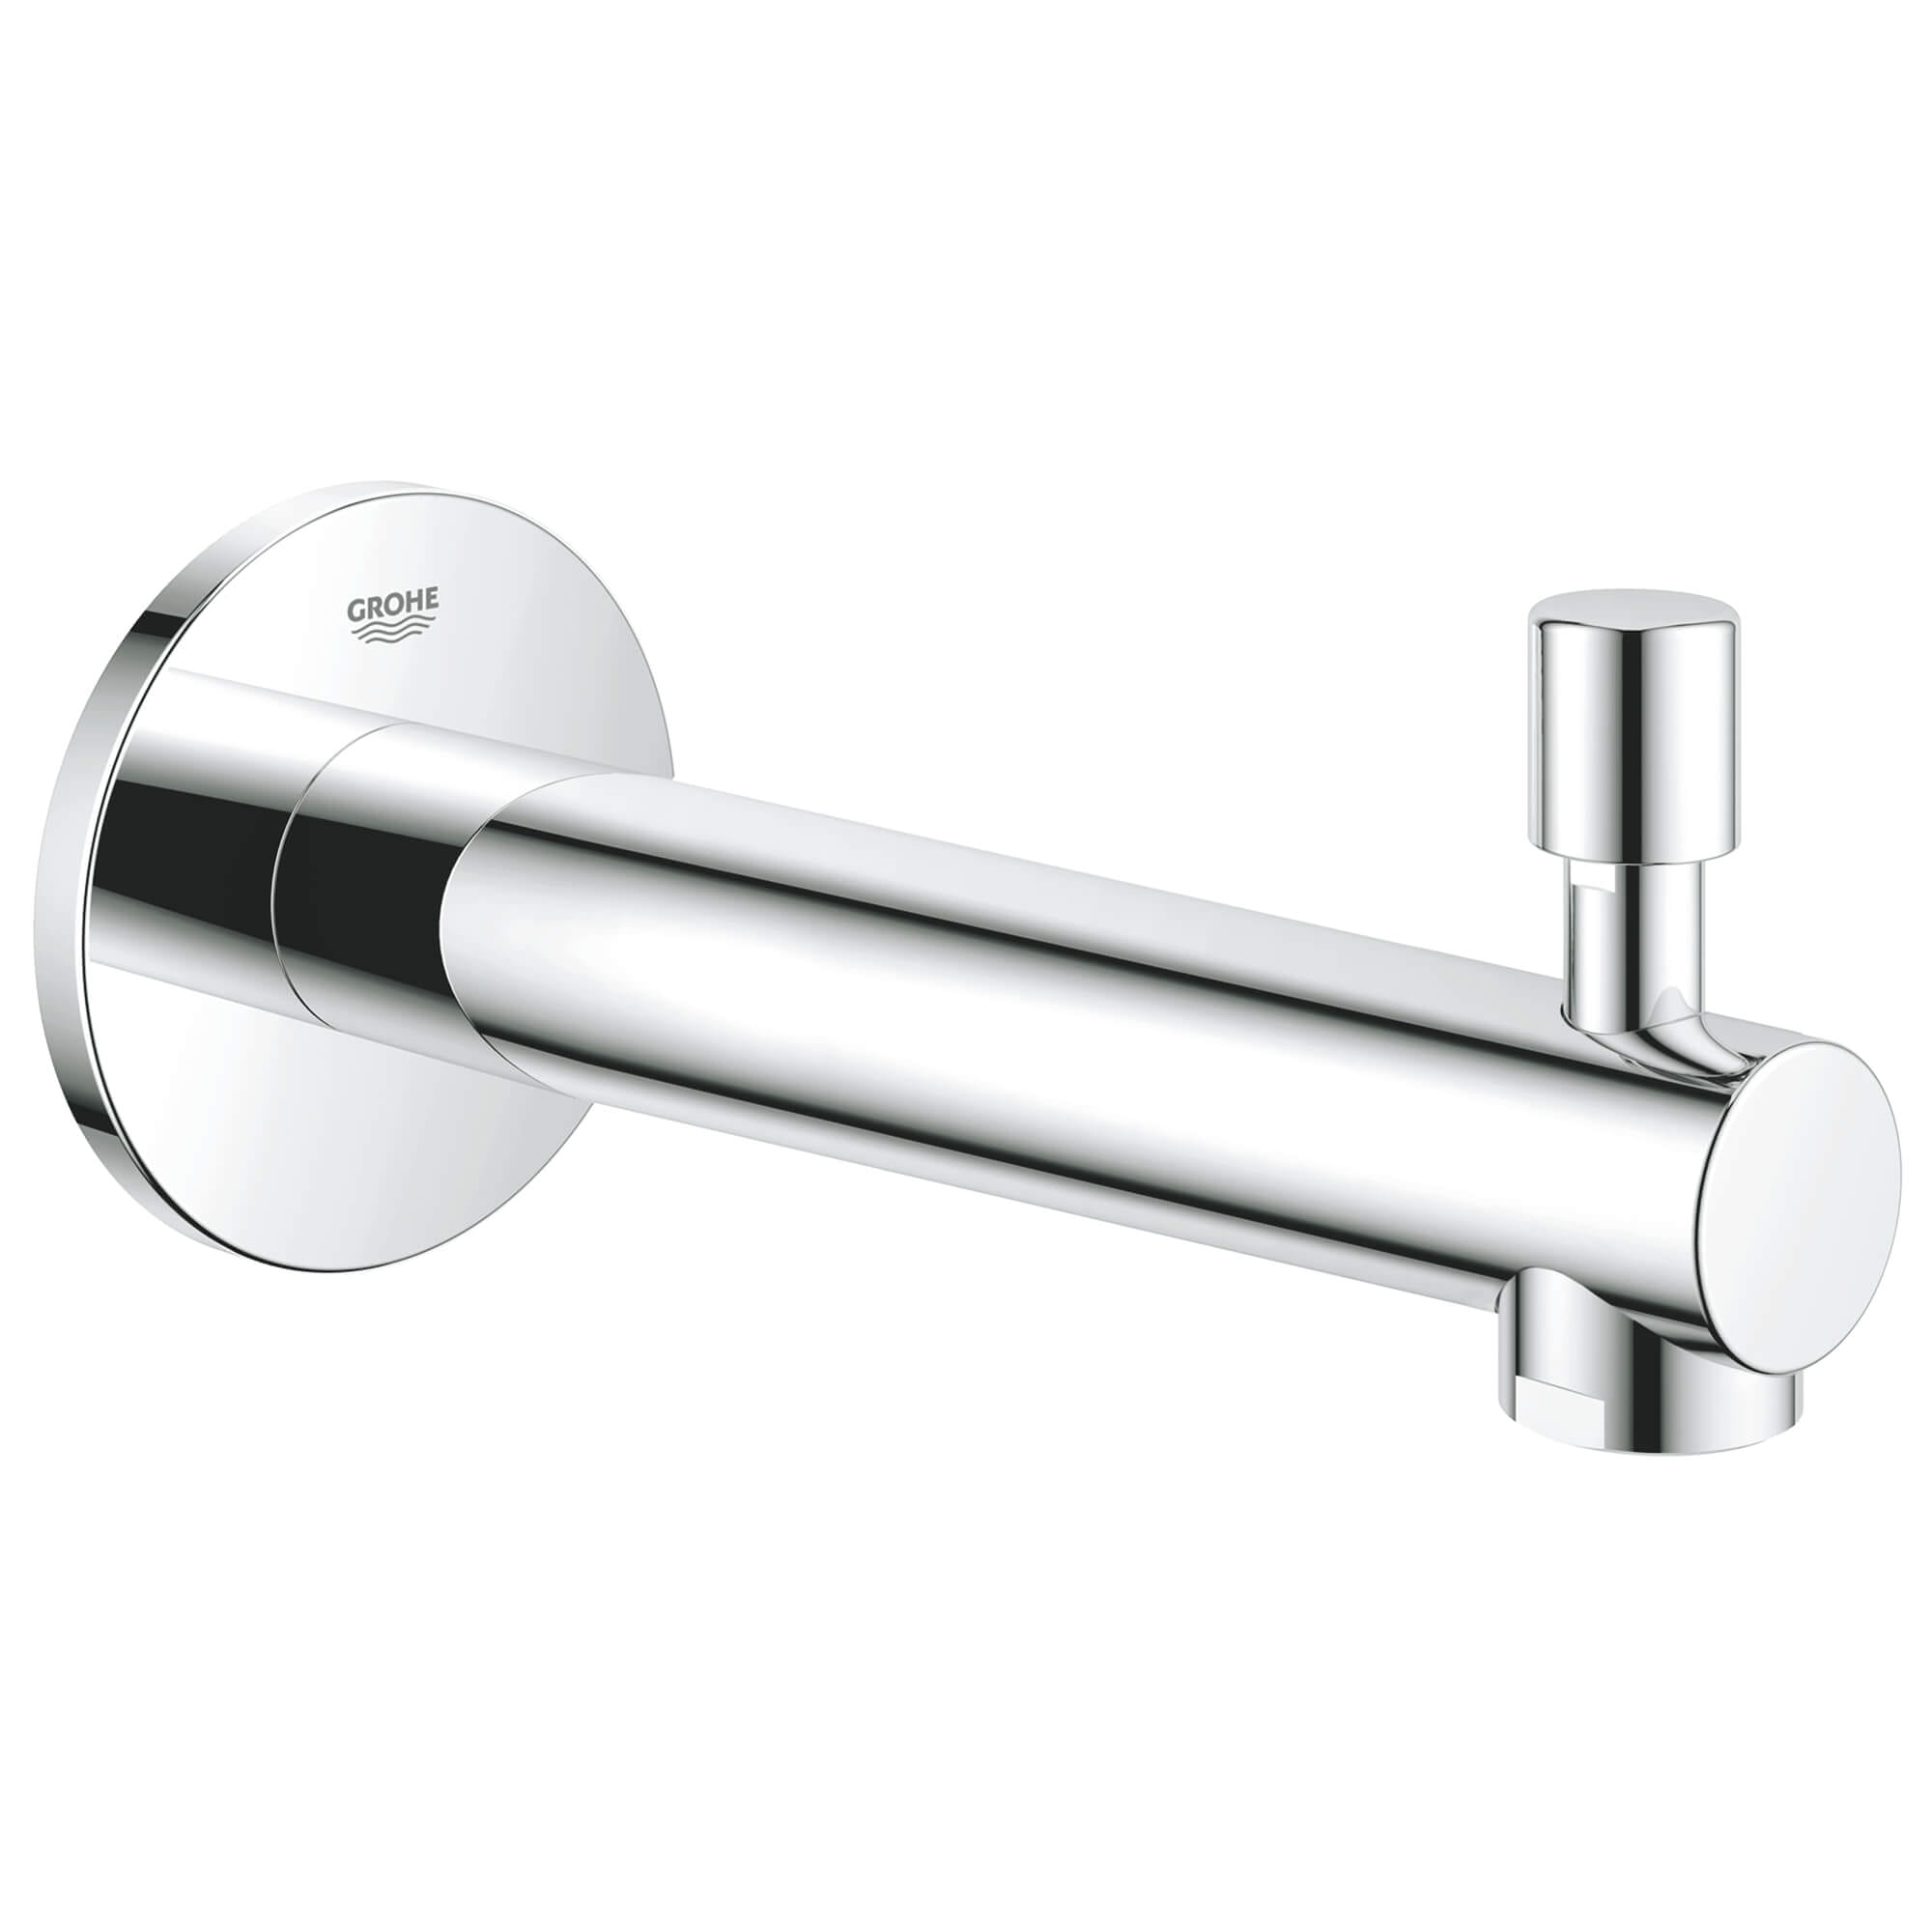 CONCETTO™  TUB SPOUT-related